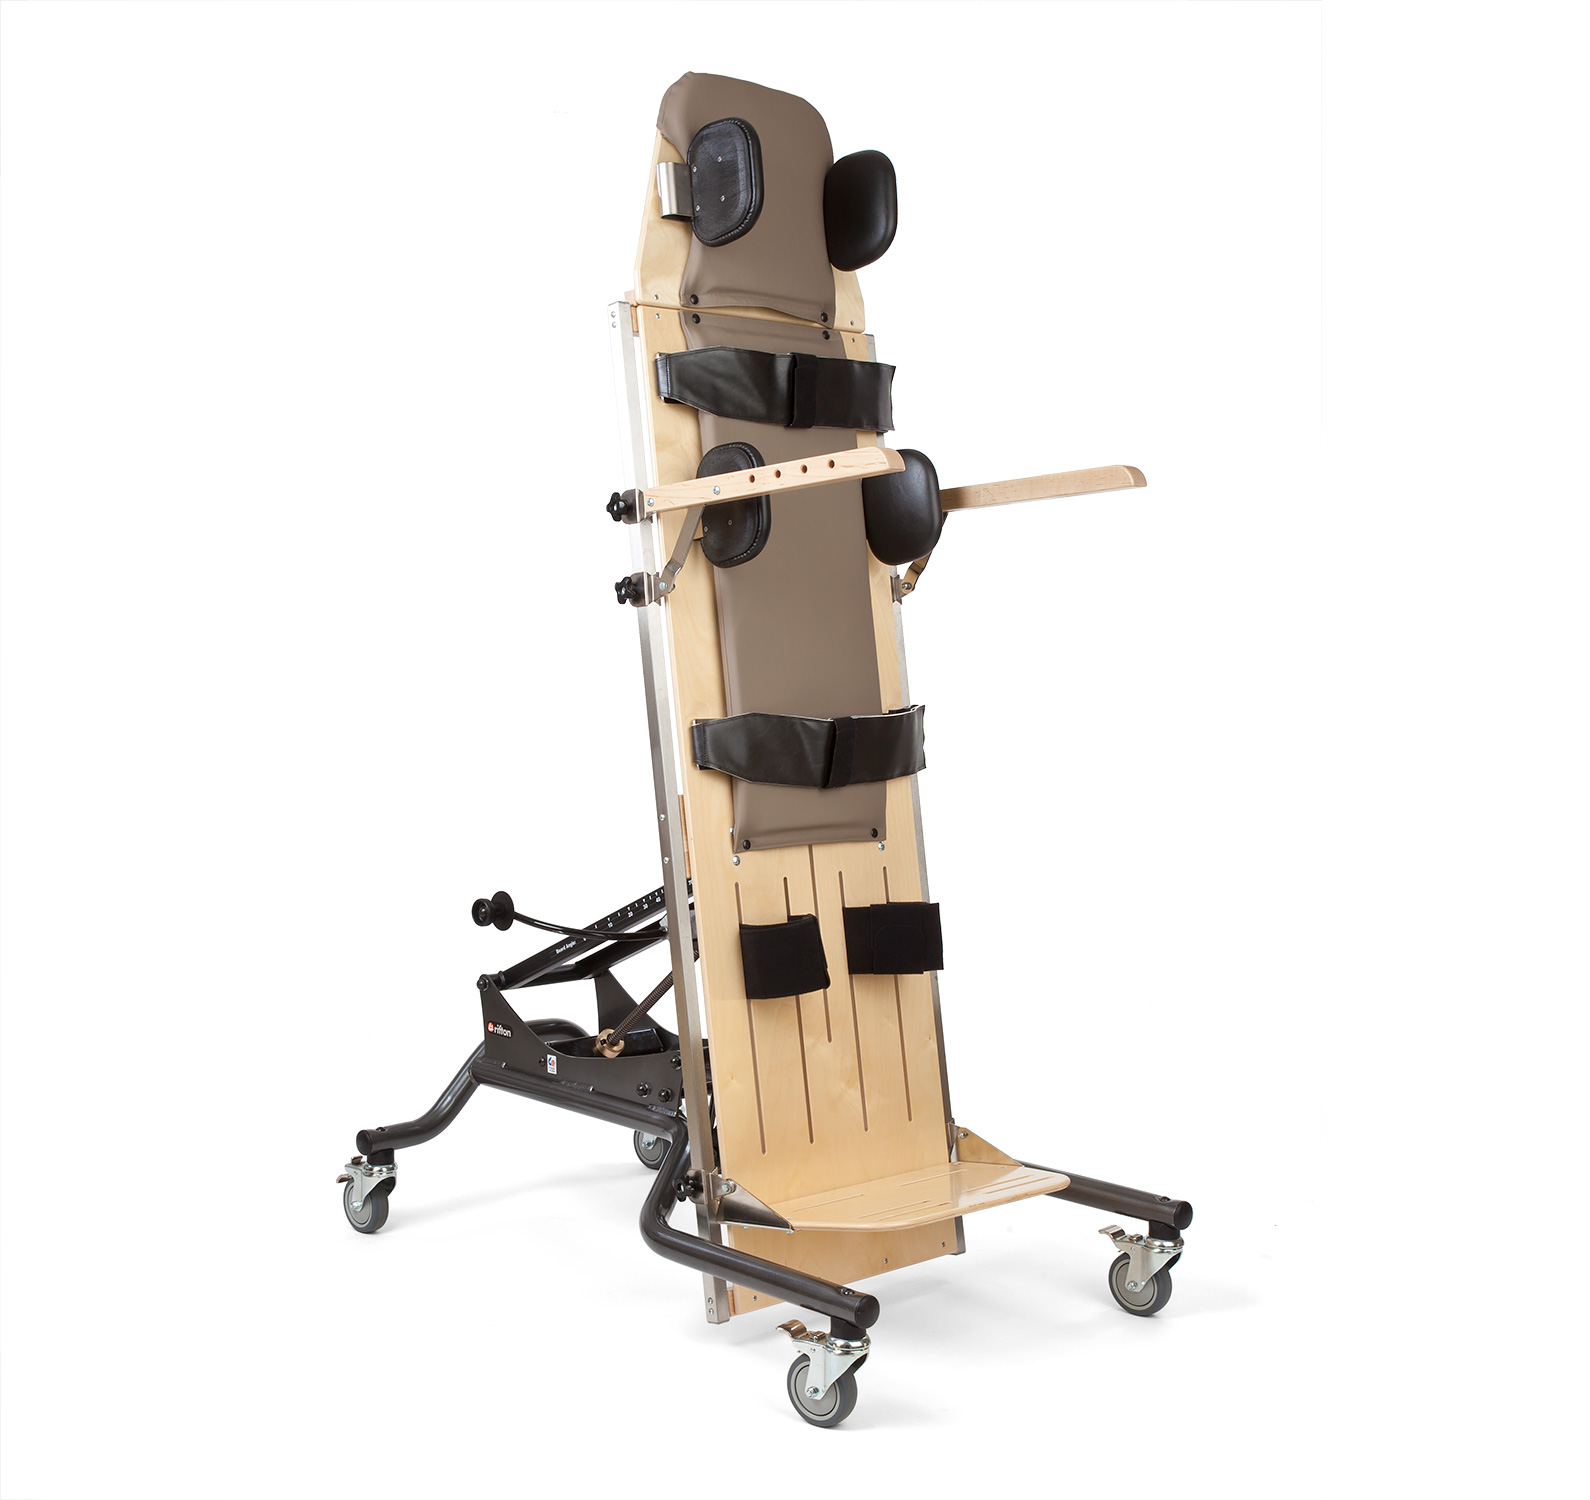 Rifton | Get a quote for the large (E430) Rifton Supine stander 